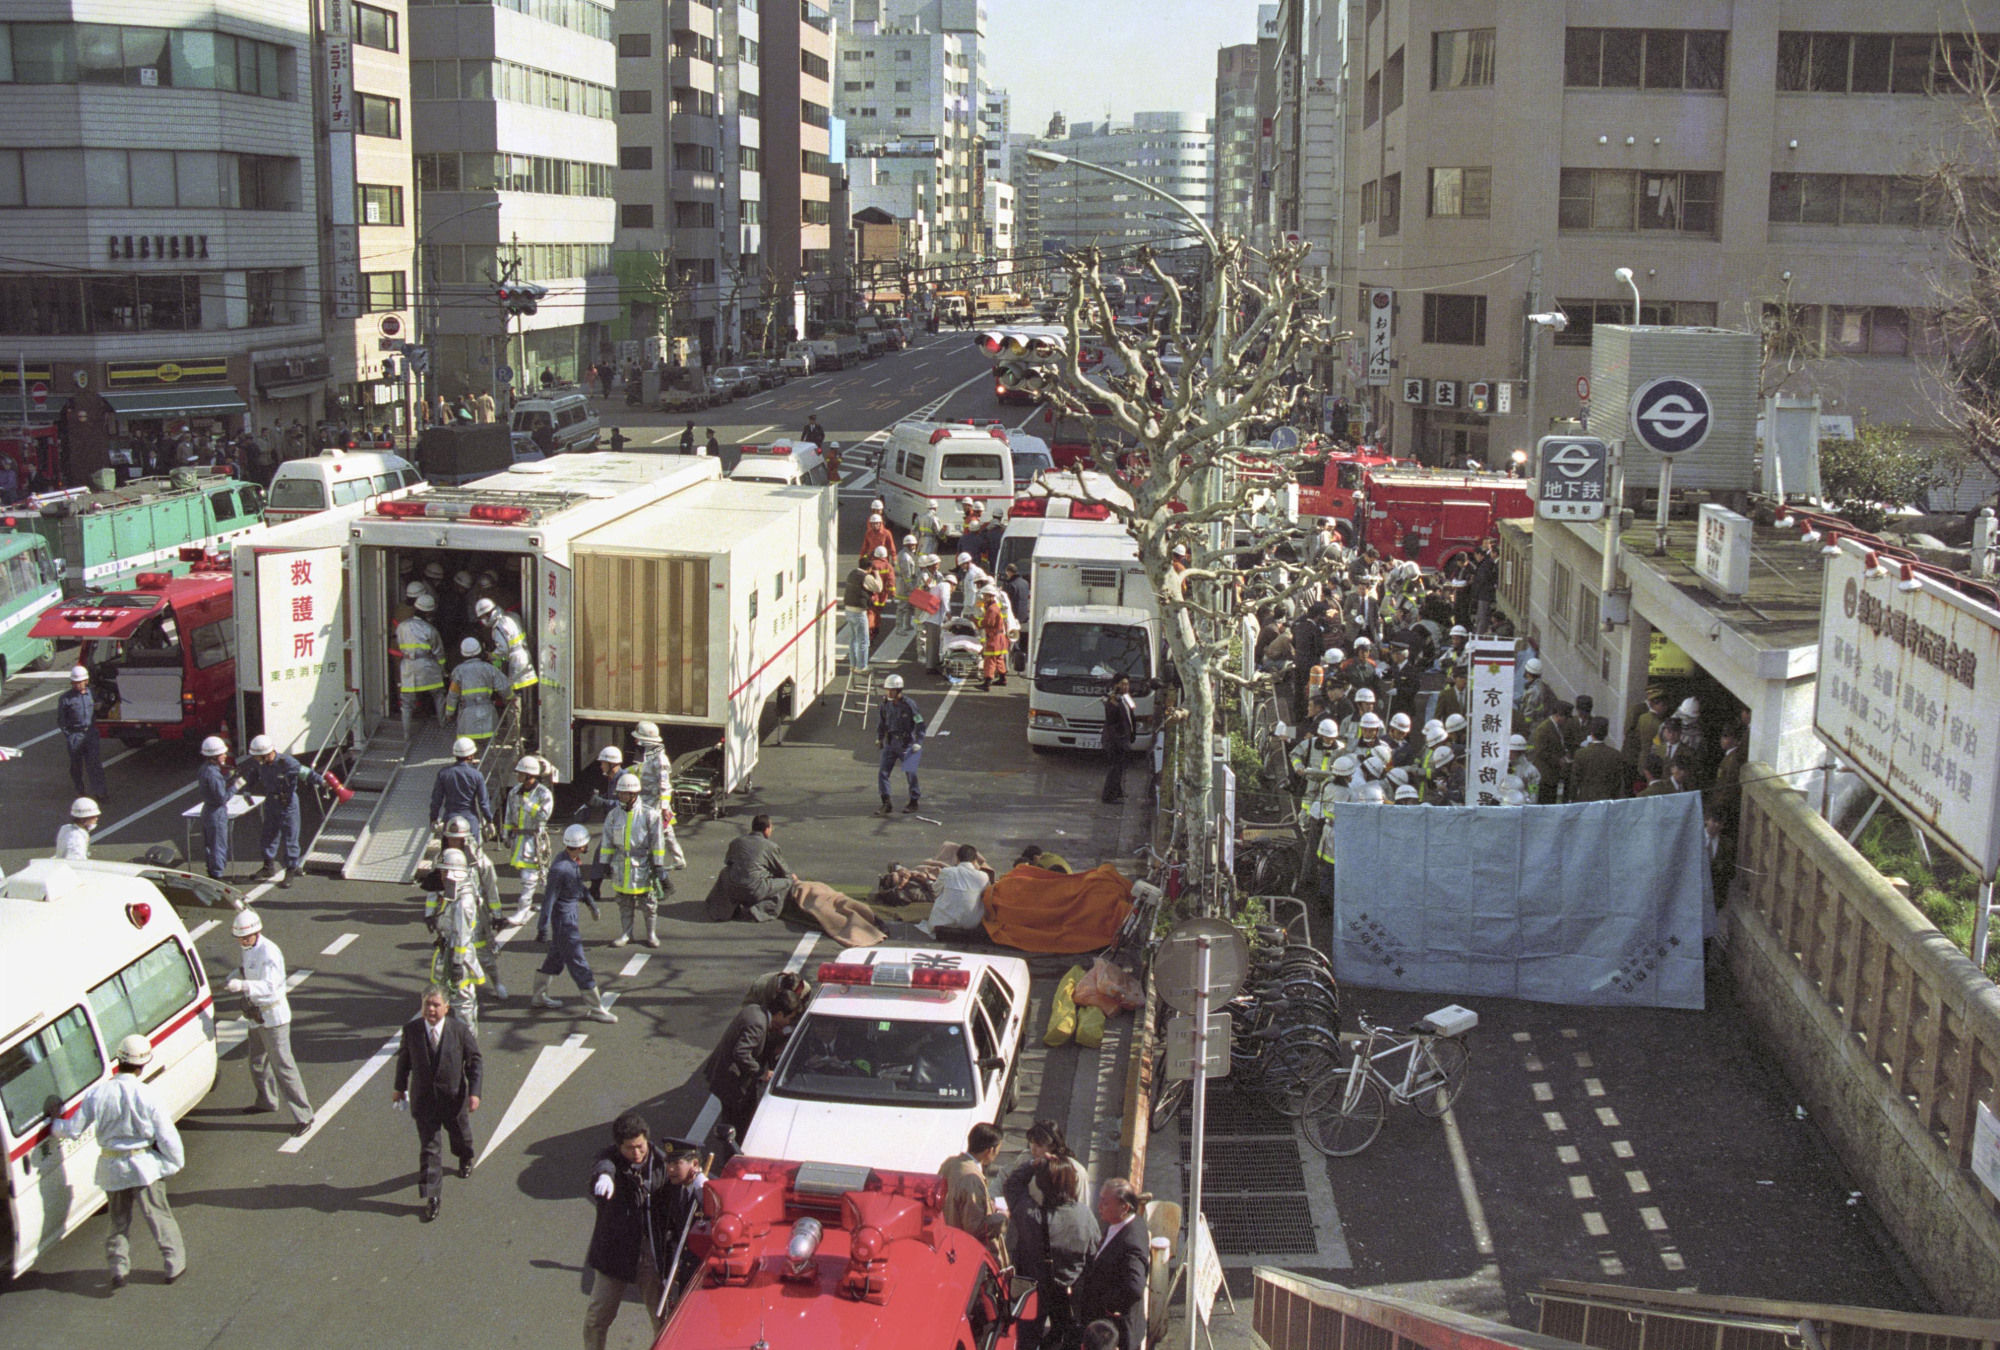 Victims are treated in front of Tsukiji Station in Tokyo after the sarin gas attack by Aum Shinrikyo on the Tokyo subway system on March 20, 1995. The attack killed 13 people and injured more than 6,200. | KYODO